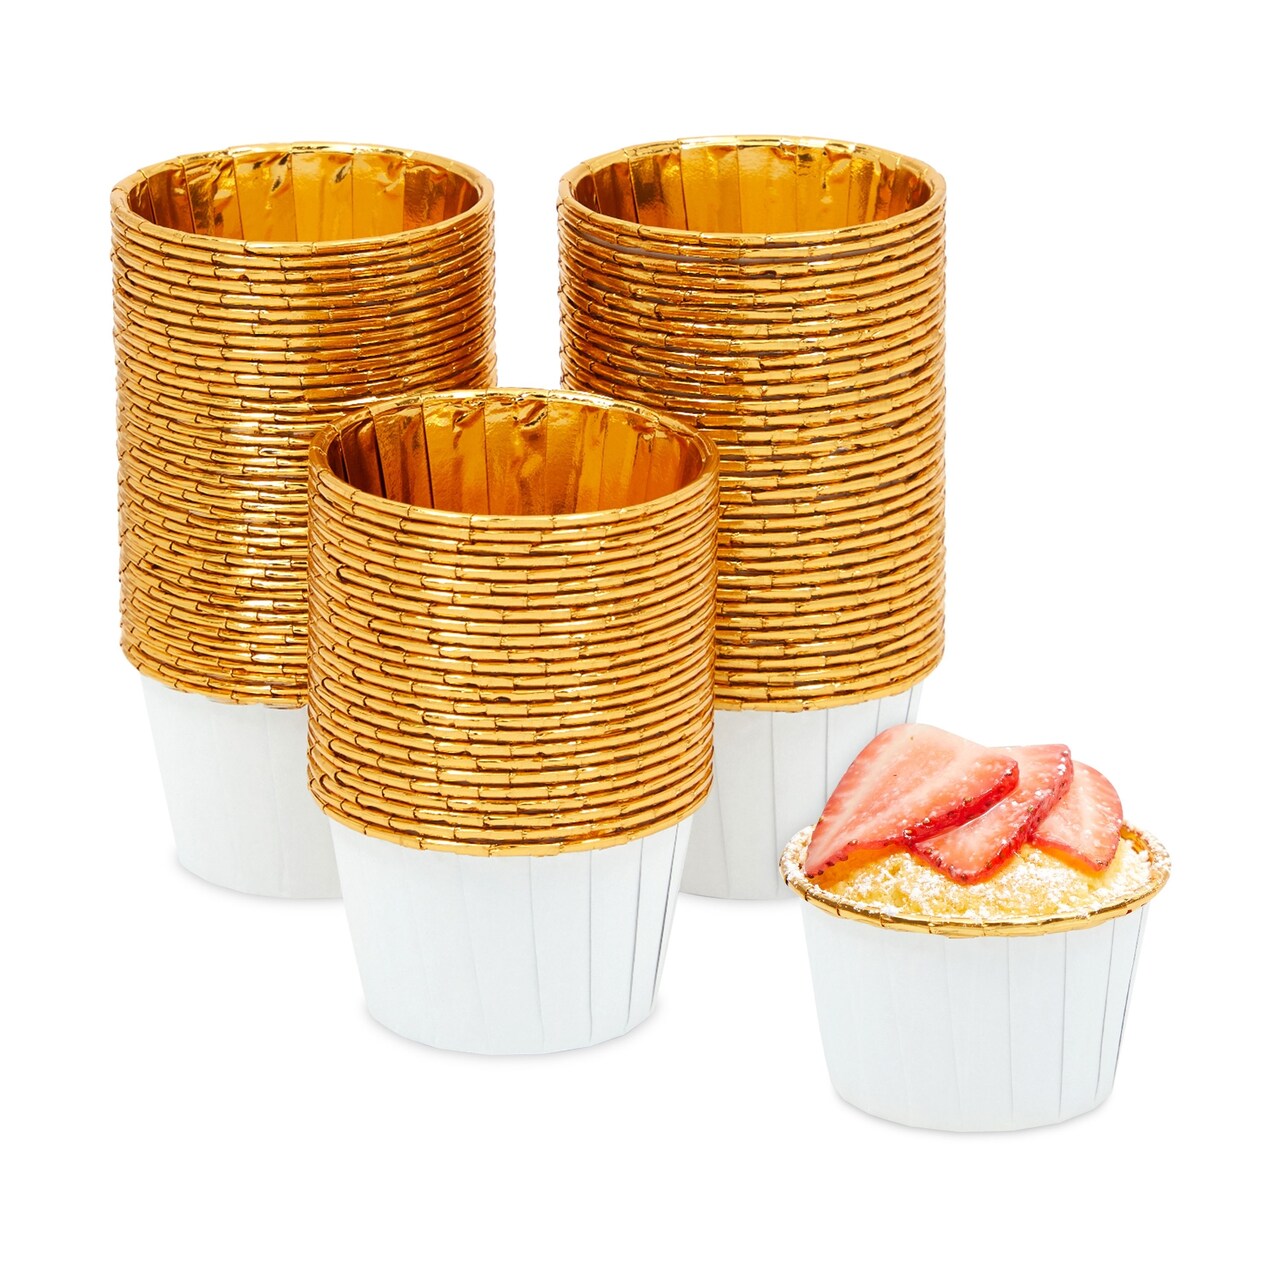 100-Pack Gold Aluminum Foil Cupcake Liners, 2.75x1.5-Inch White